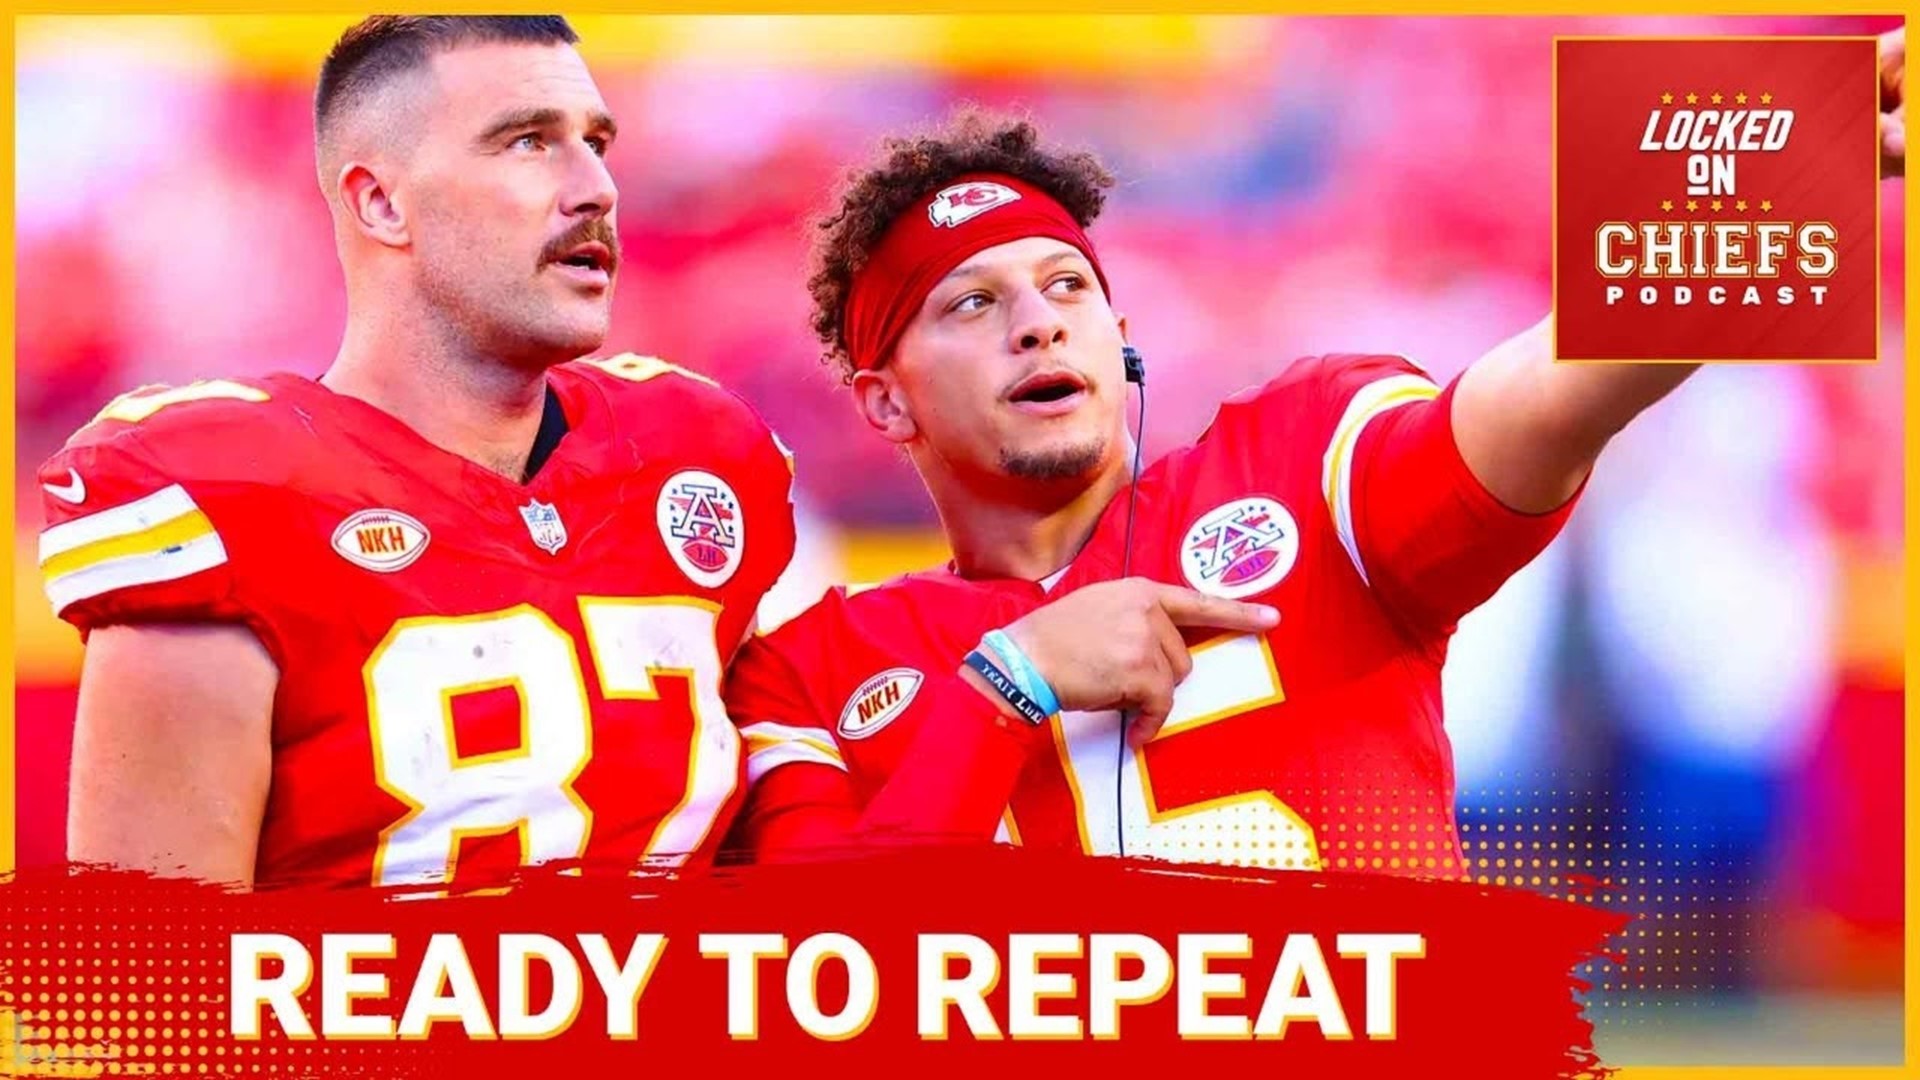 The Kansas City Chiefs will take apart grounded New York Jets in NFL's Week 4!